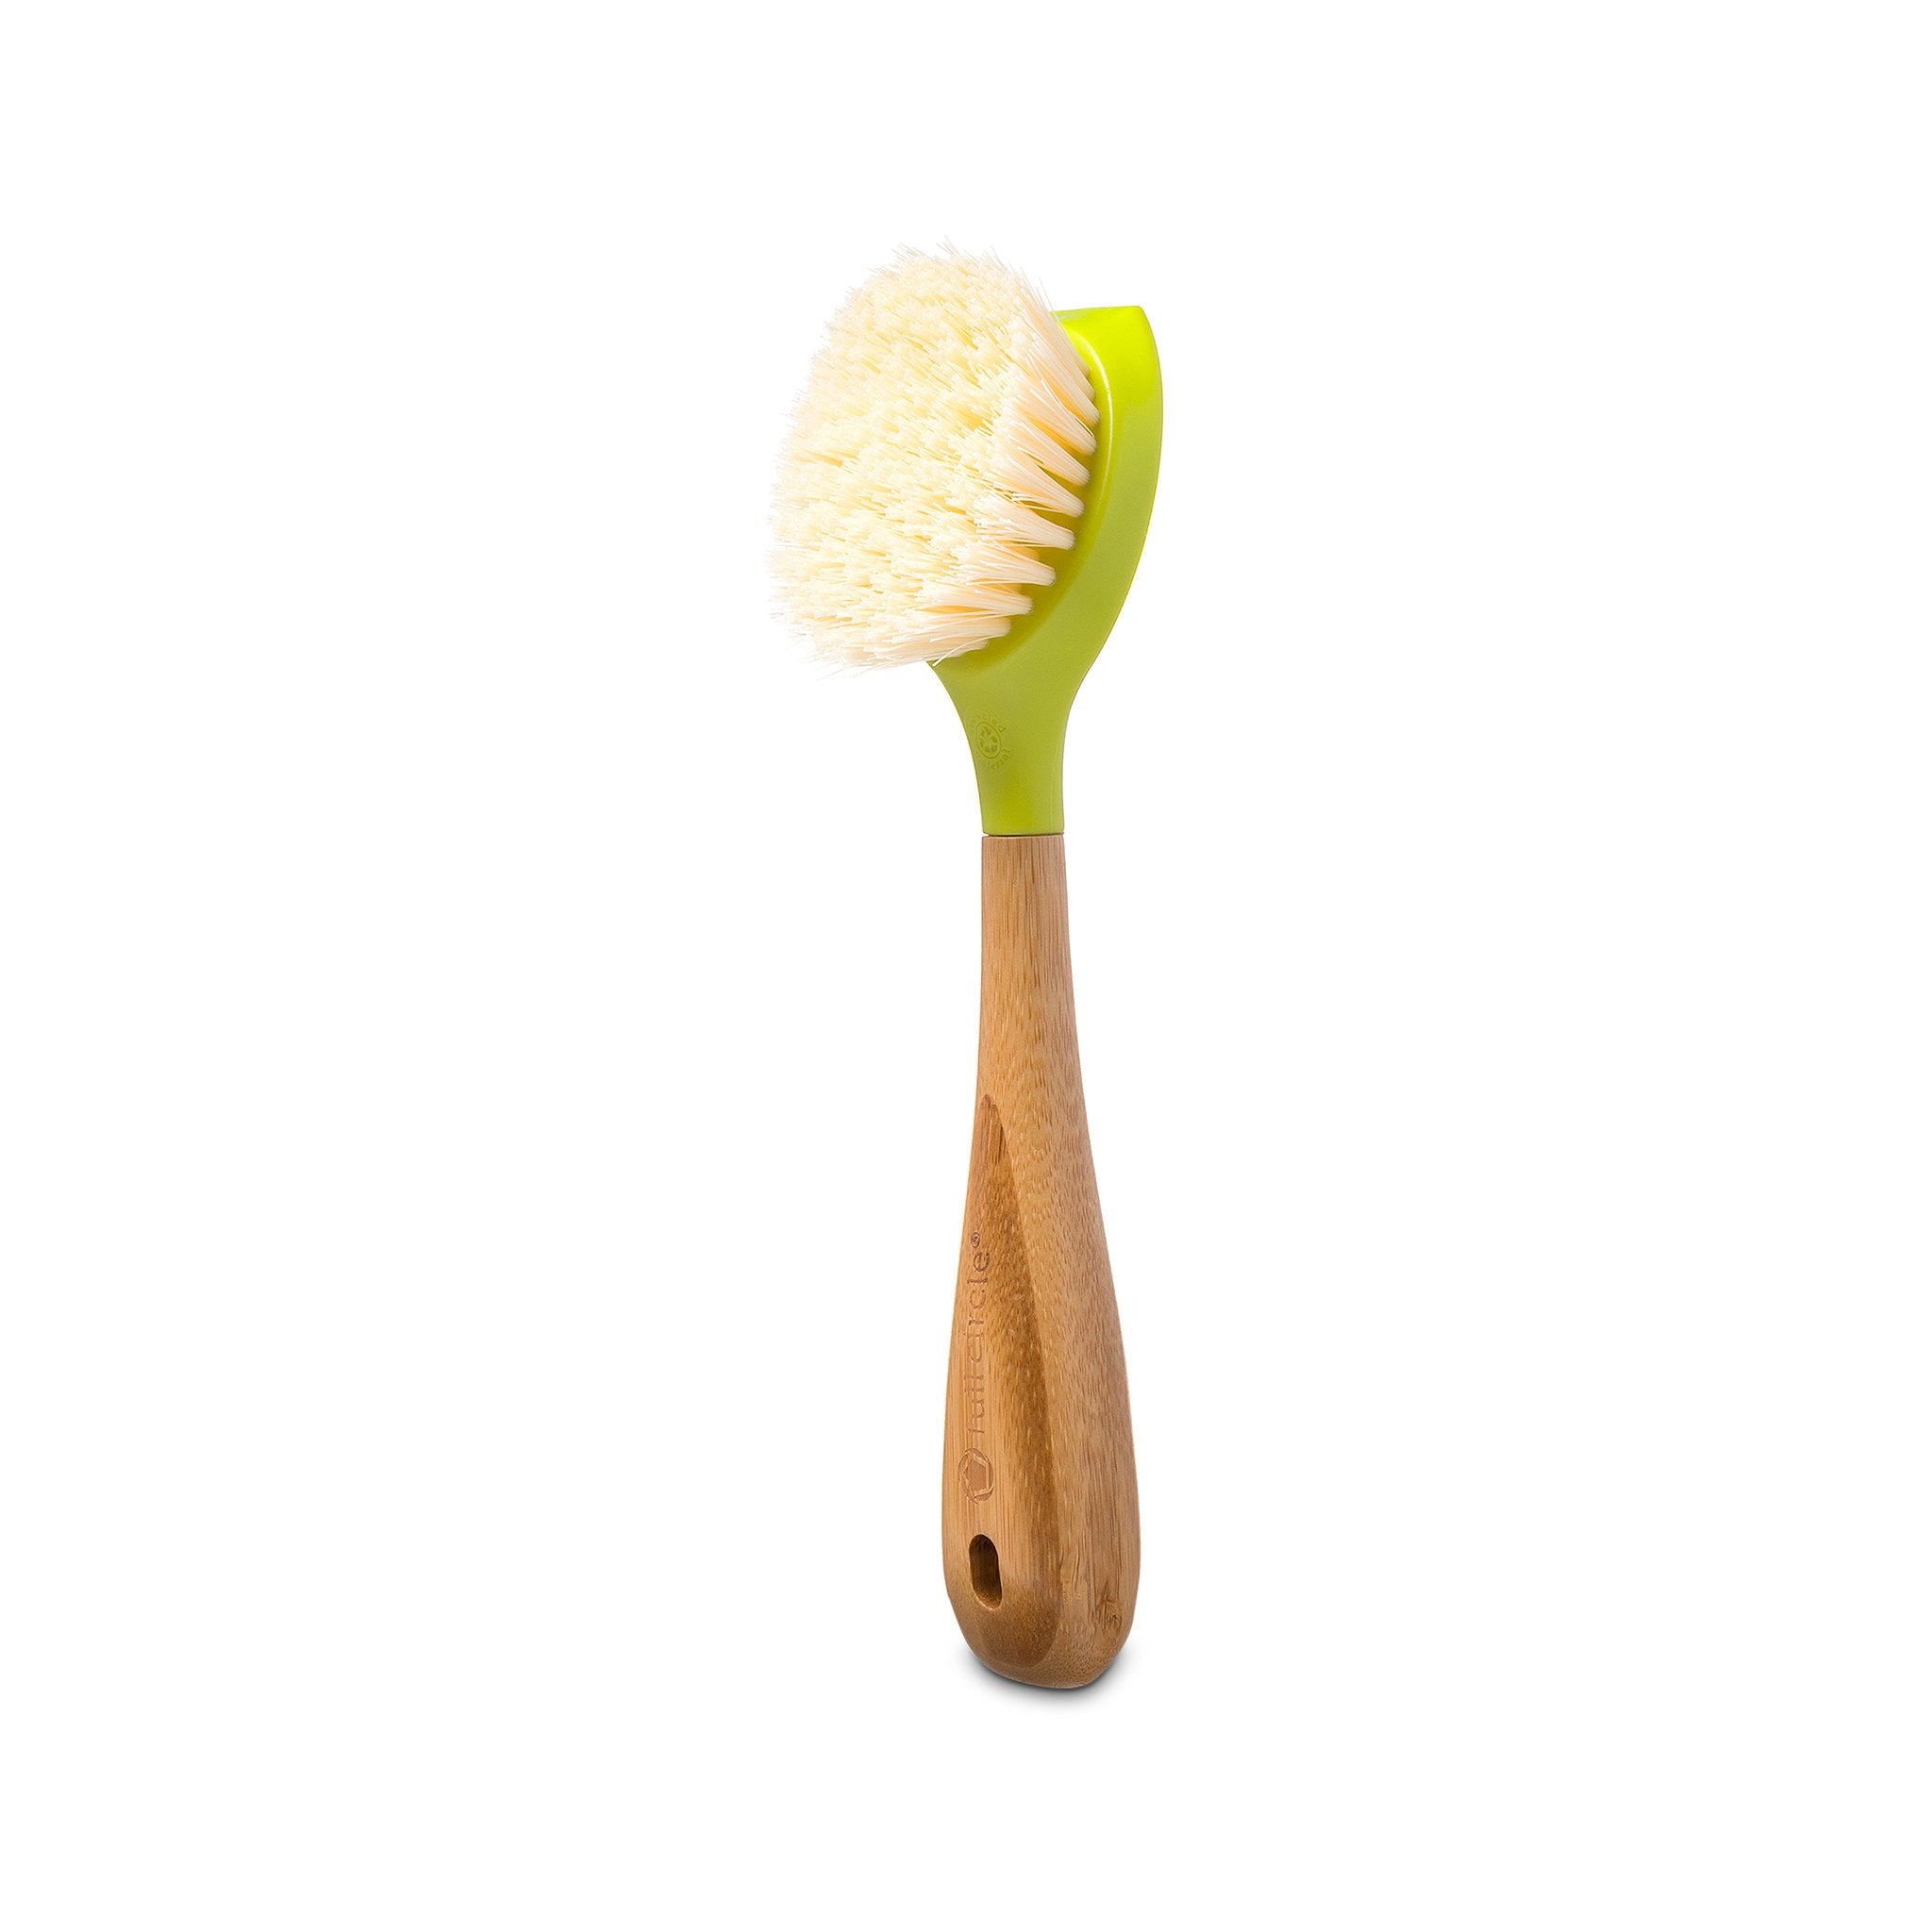  Full Circle Laid Back 2.0 Dish Brush Refill Replacement Head, 2  Pack , White , 8 In : Home & Kitchen